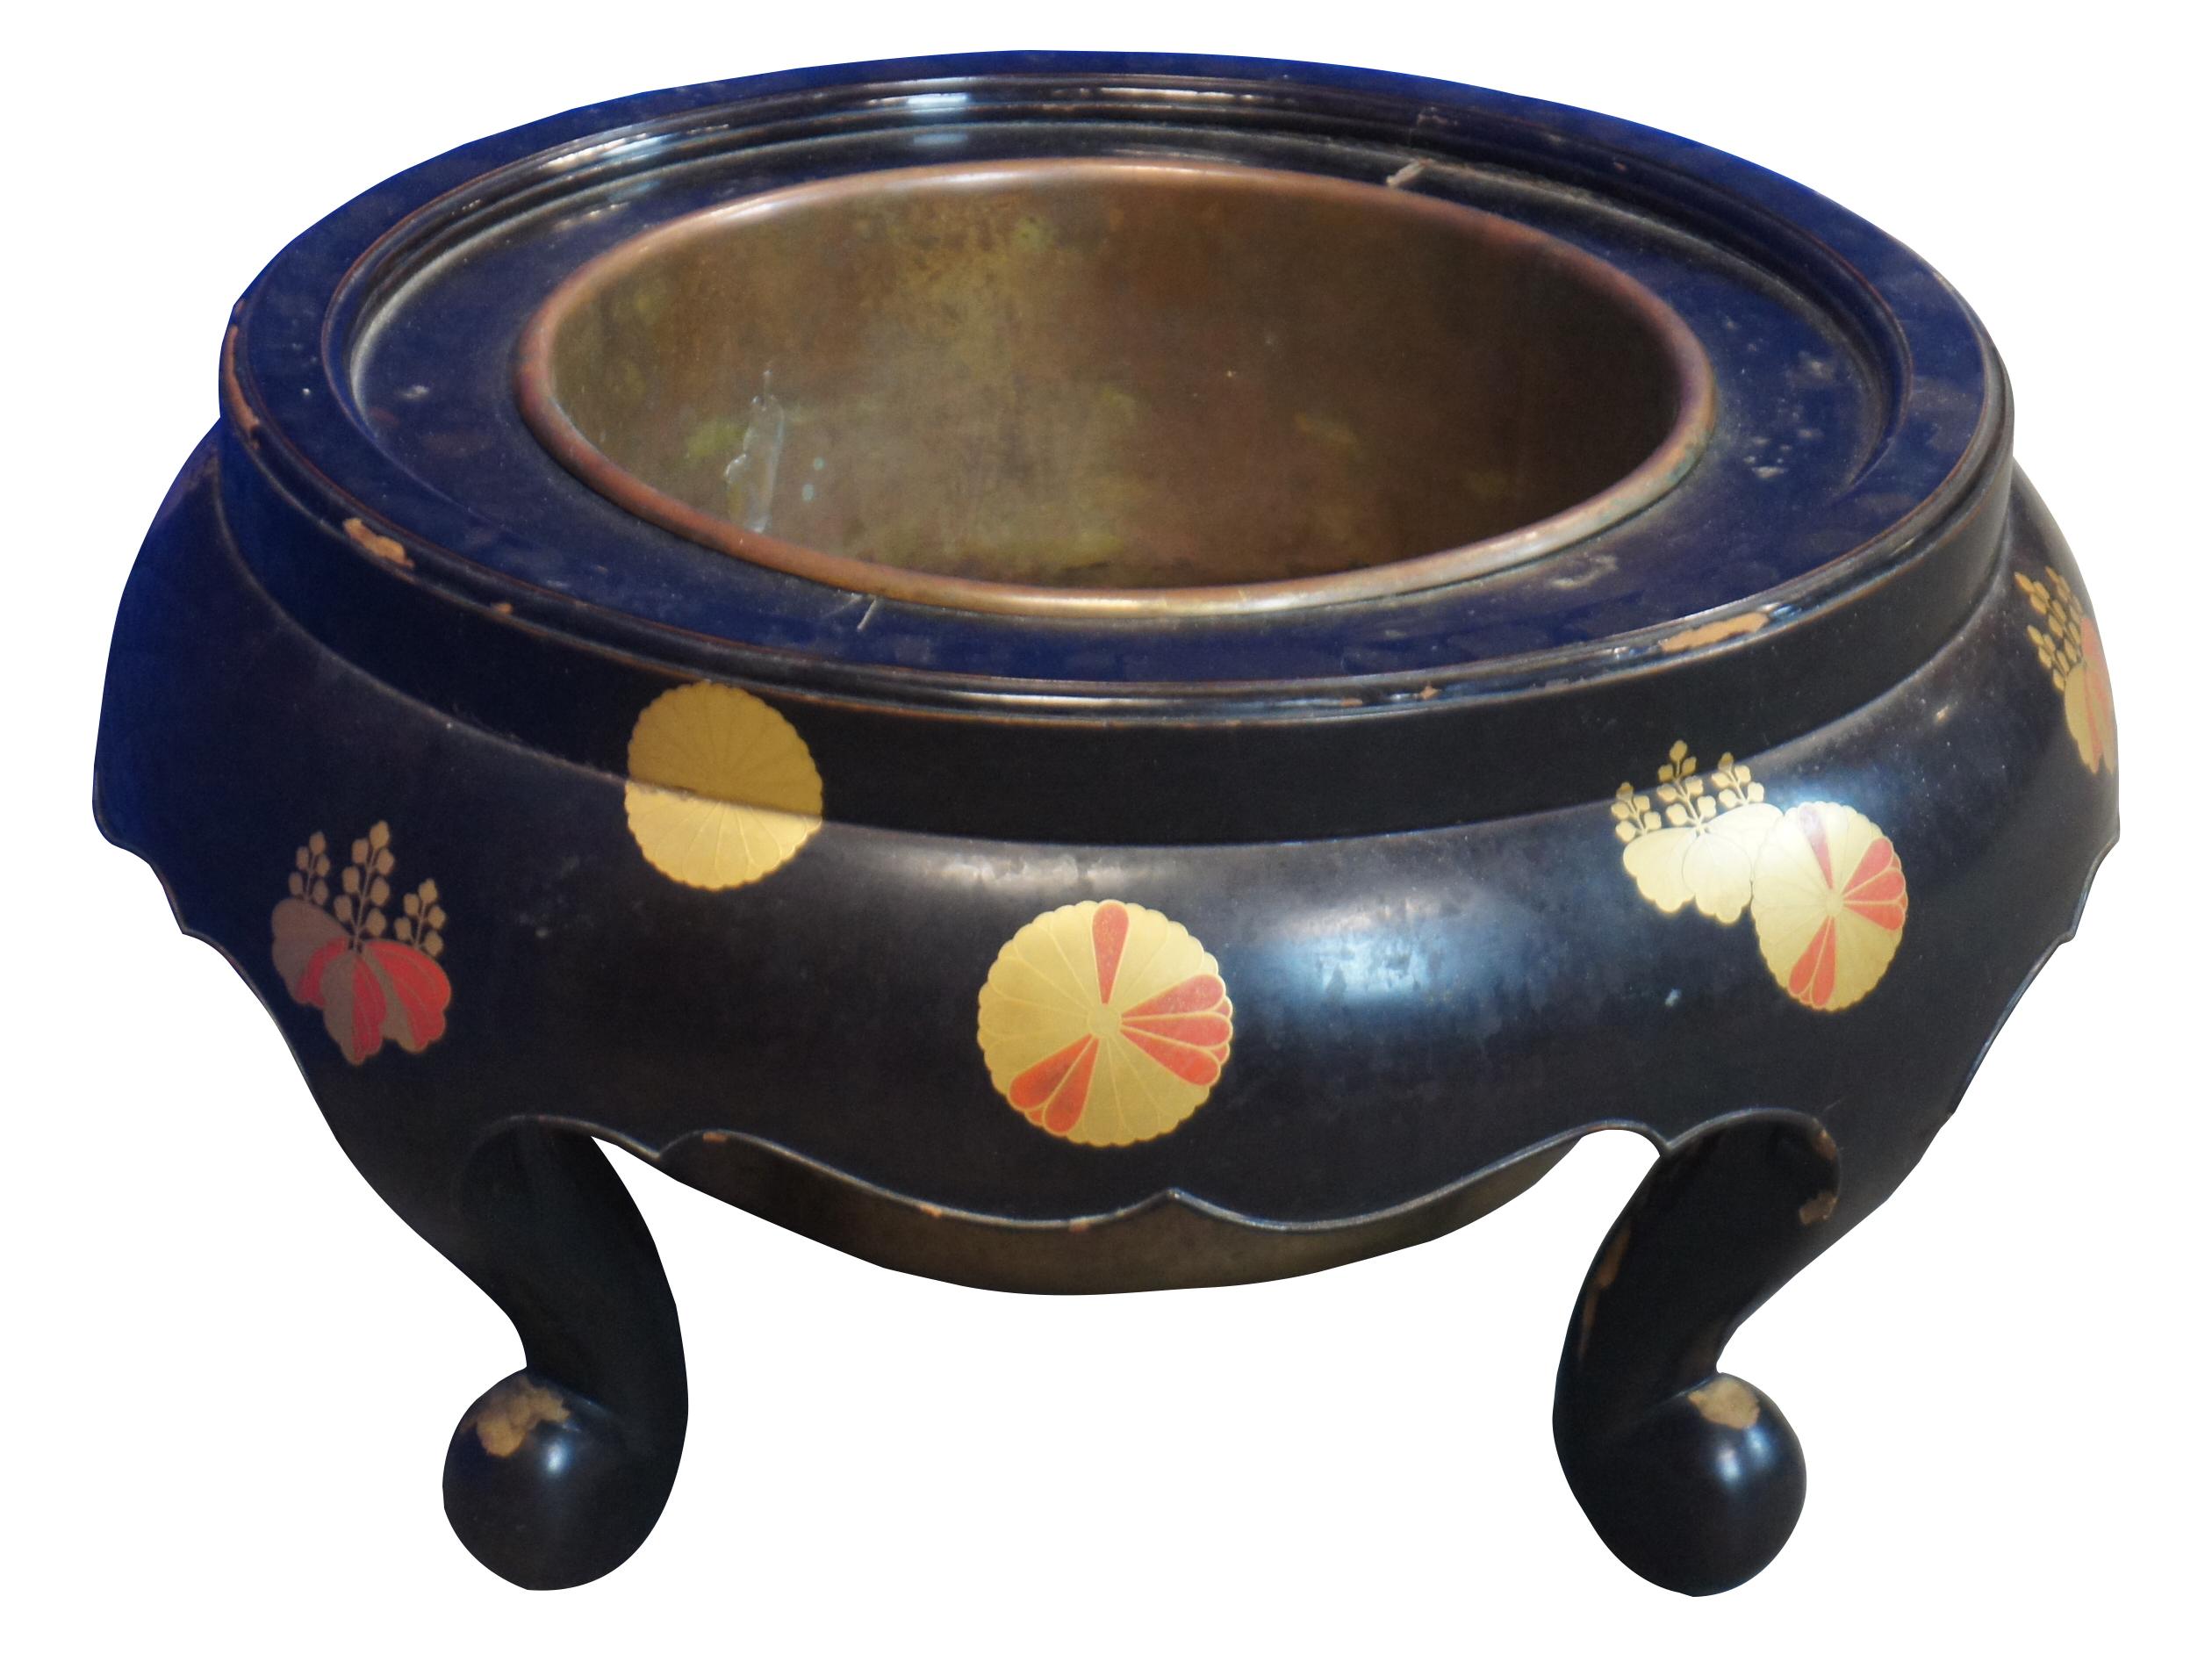 Antique Japanese late Edo / Tokugawa period Hibachi used for burning coal, as a portable heater, and as a heating device for a pot of tea. In today’s interiors, they are wonderful containers for orchids, plants, and useful as an ice bucket, or